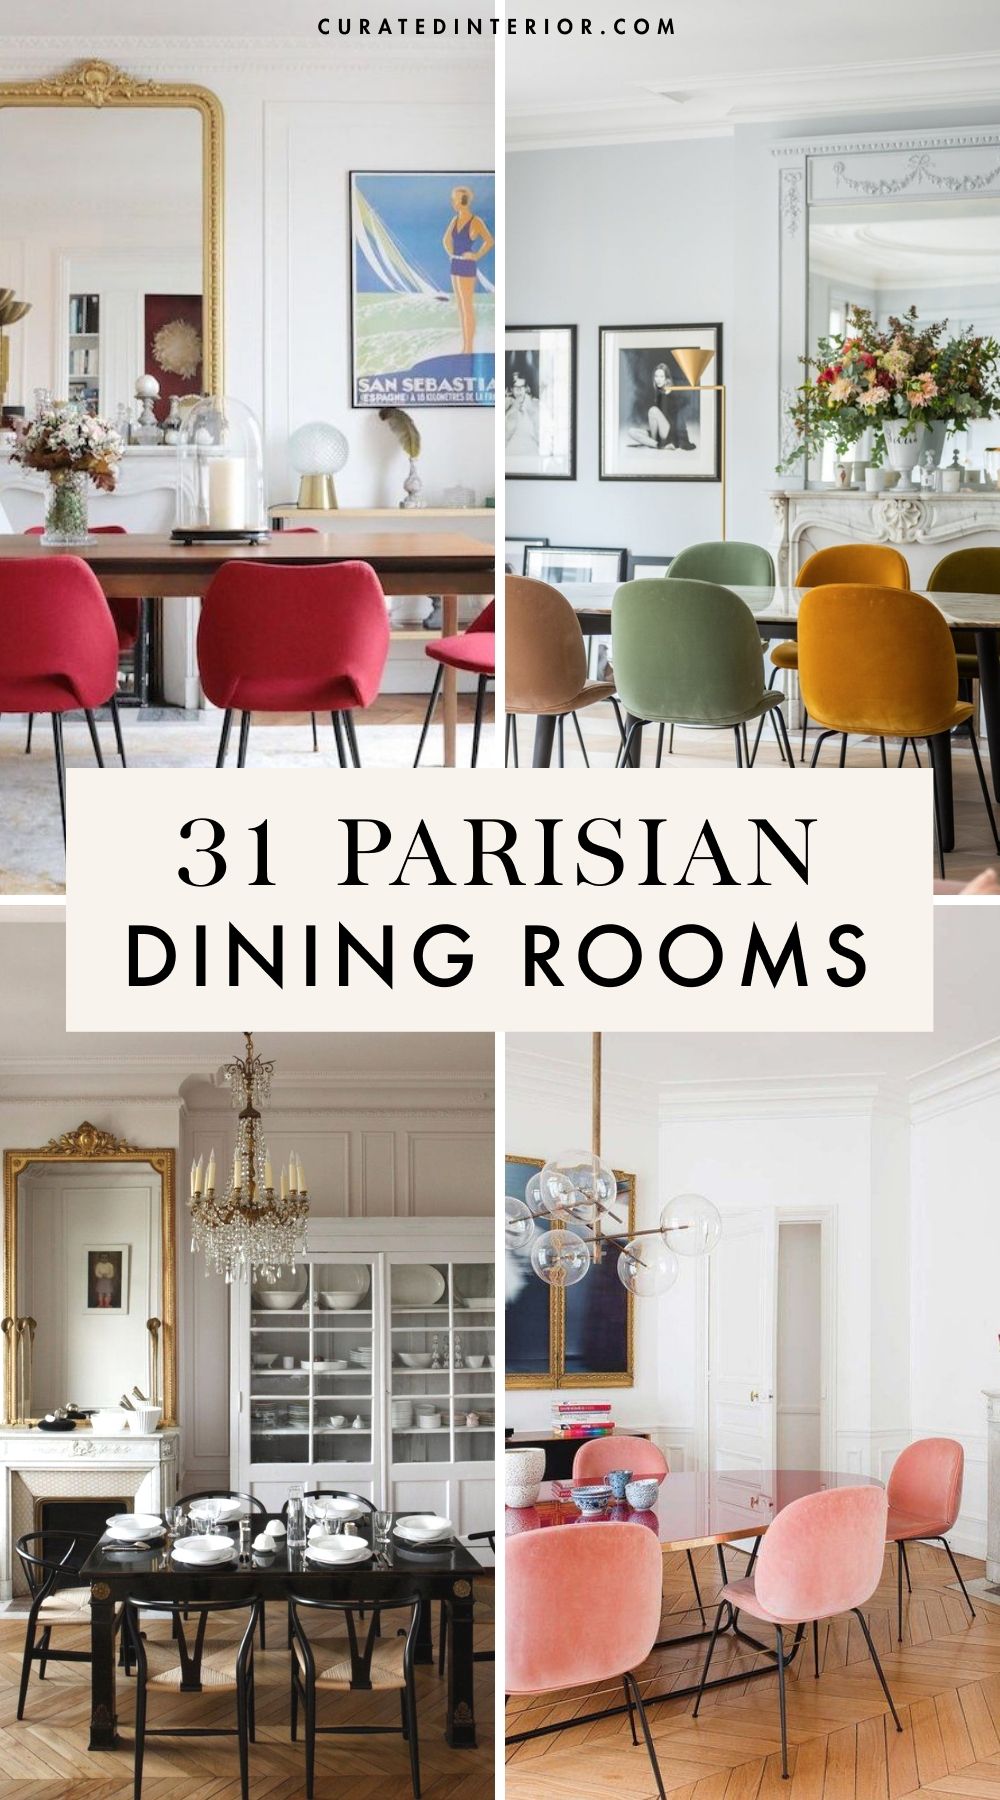 31 Parisian Dining Rooms You Must See!